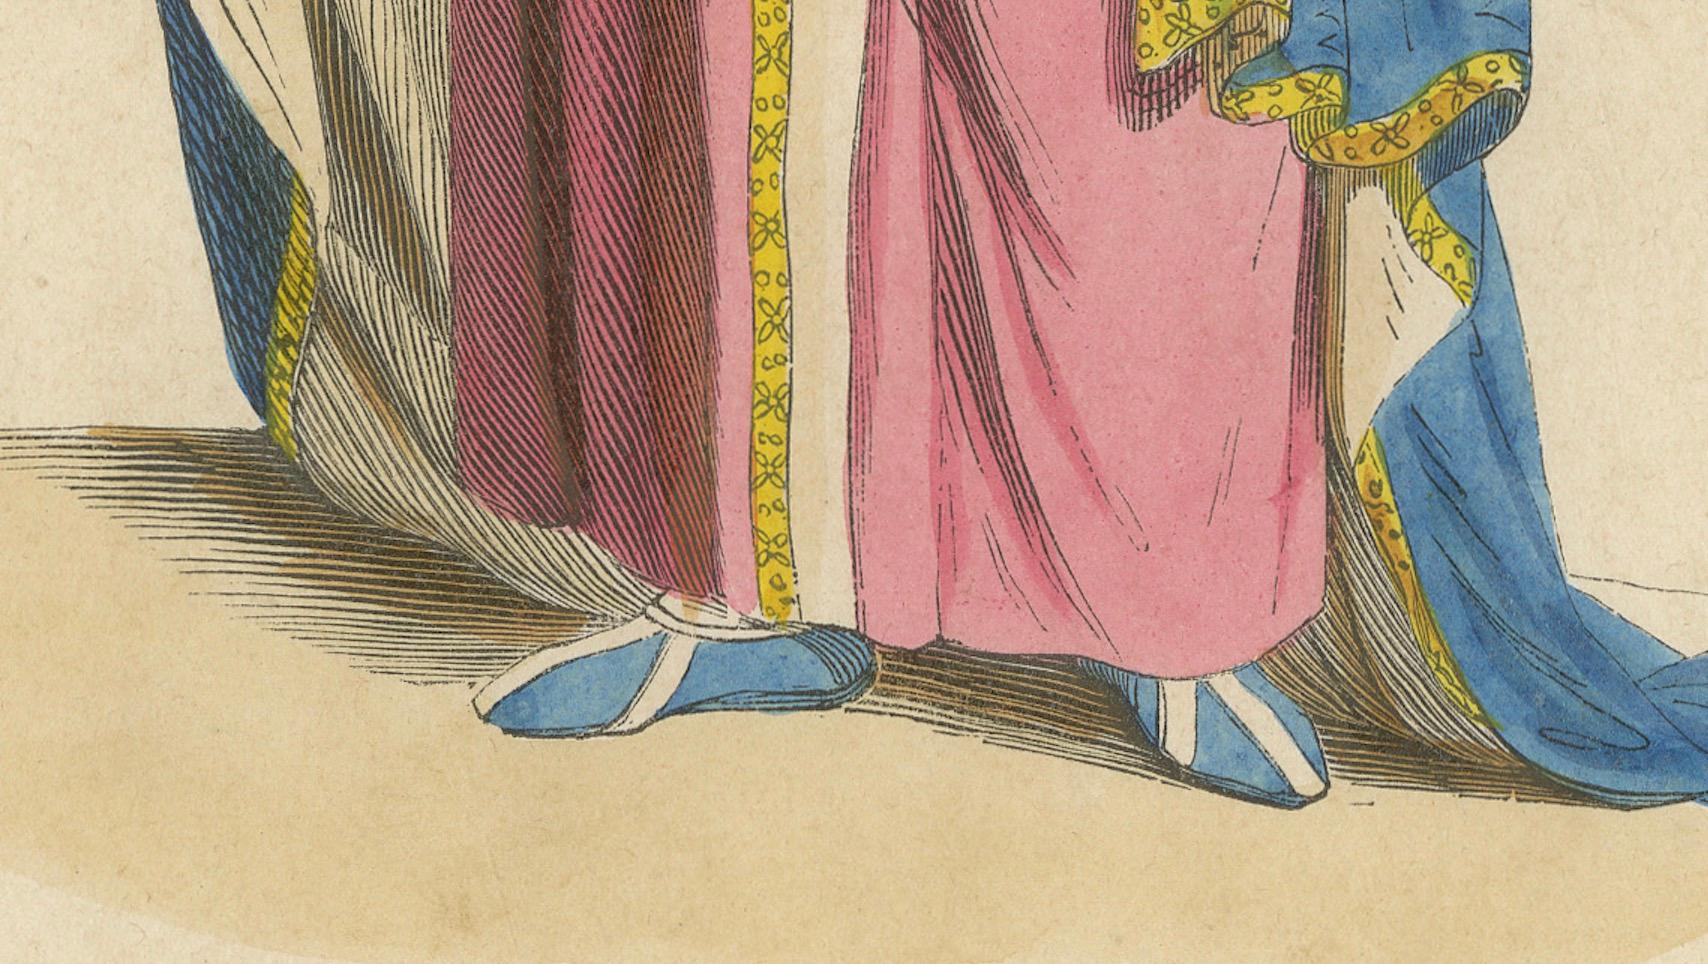 Paper Edward III: Majesty in Medieval Regalia, Hand-Colored Lithograph, 1847